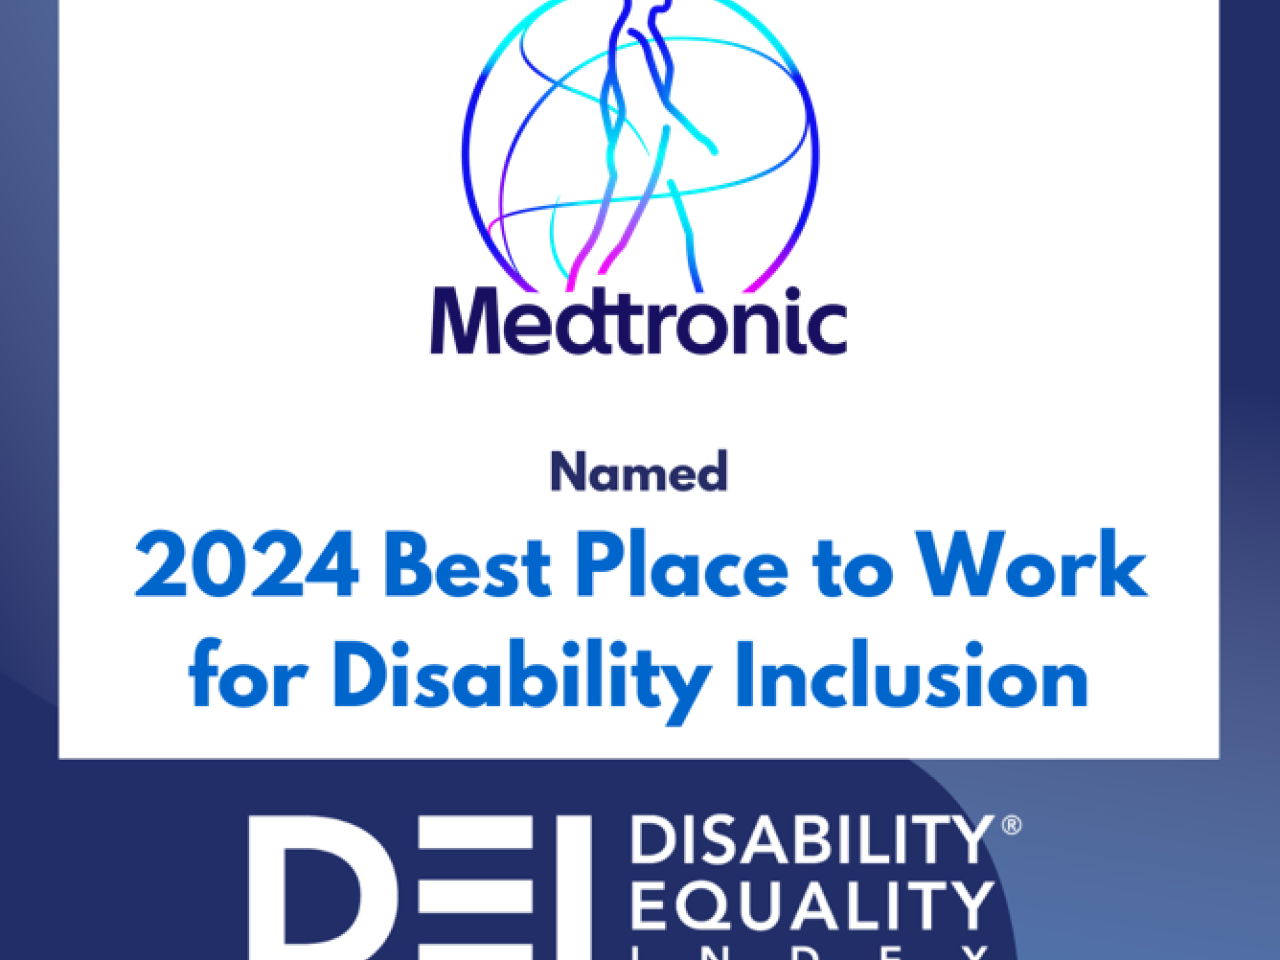 Disability Equality Index graphic with Medtronic logo